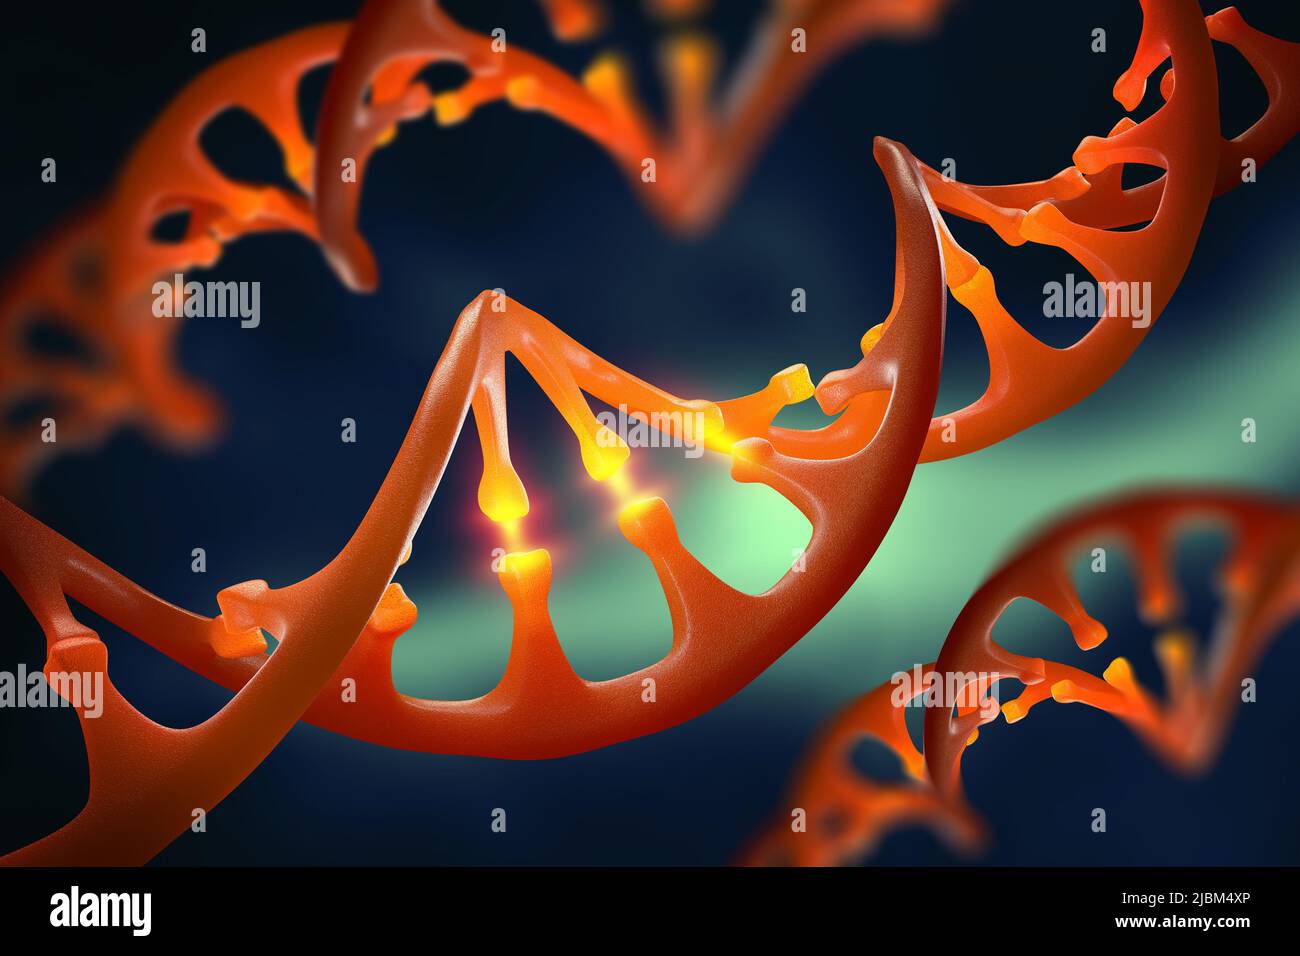 DNA molecule. Genetic modification. Study of the structure of the human genome. 3D illustration on biotechnology Stock Photo